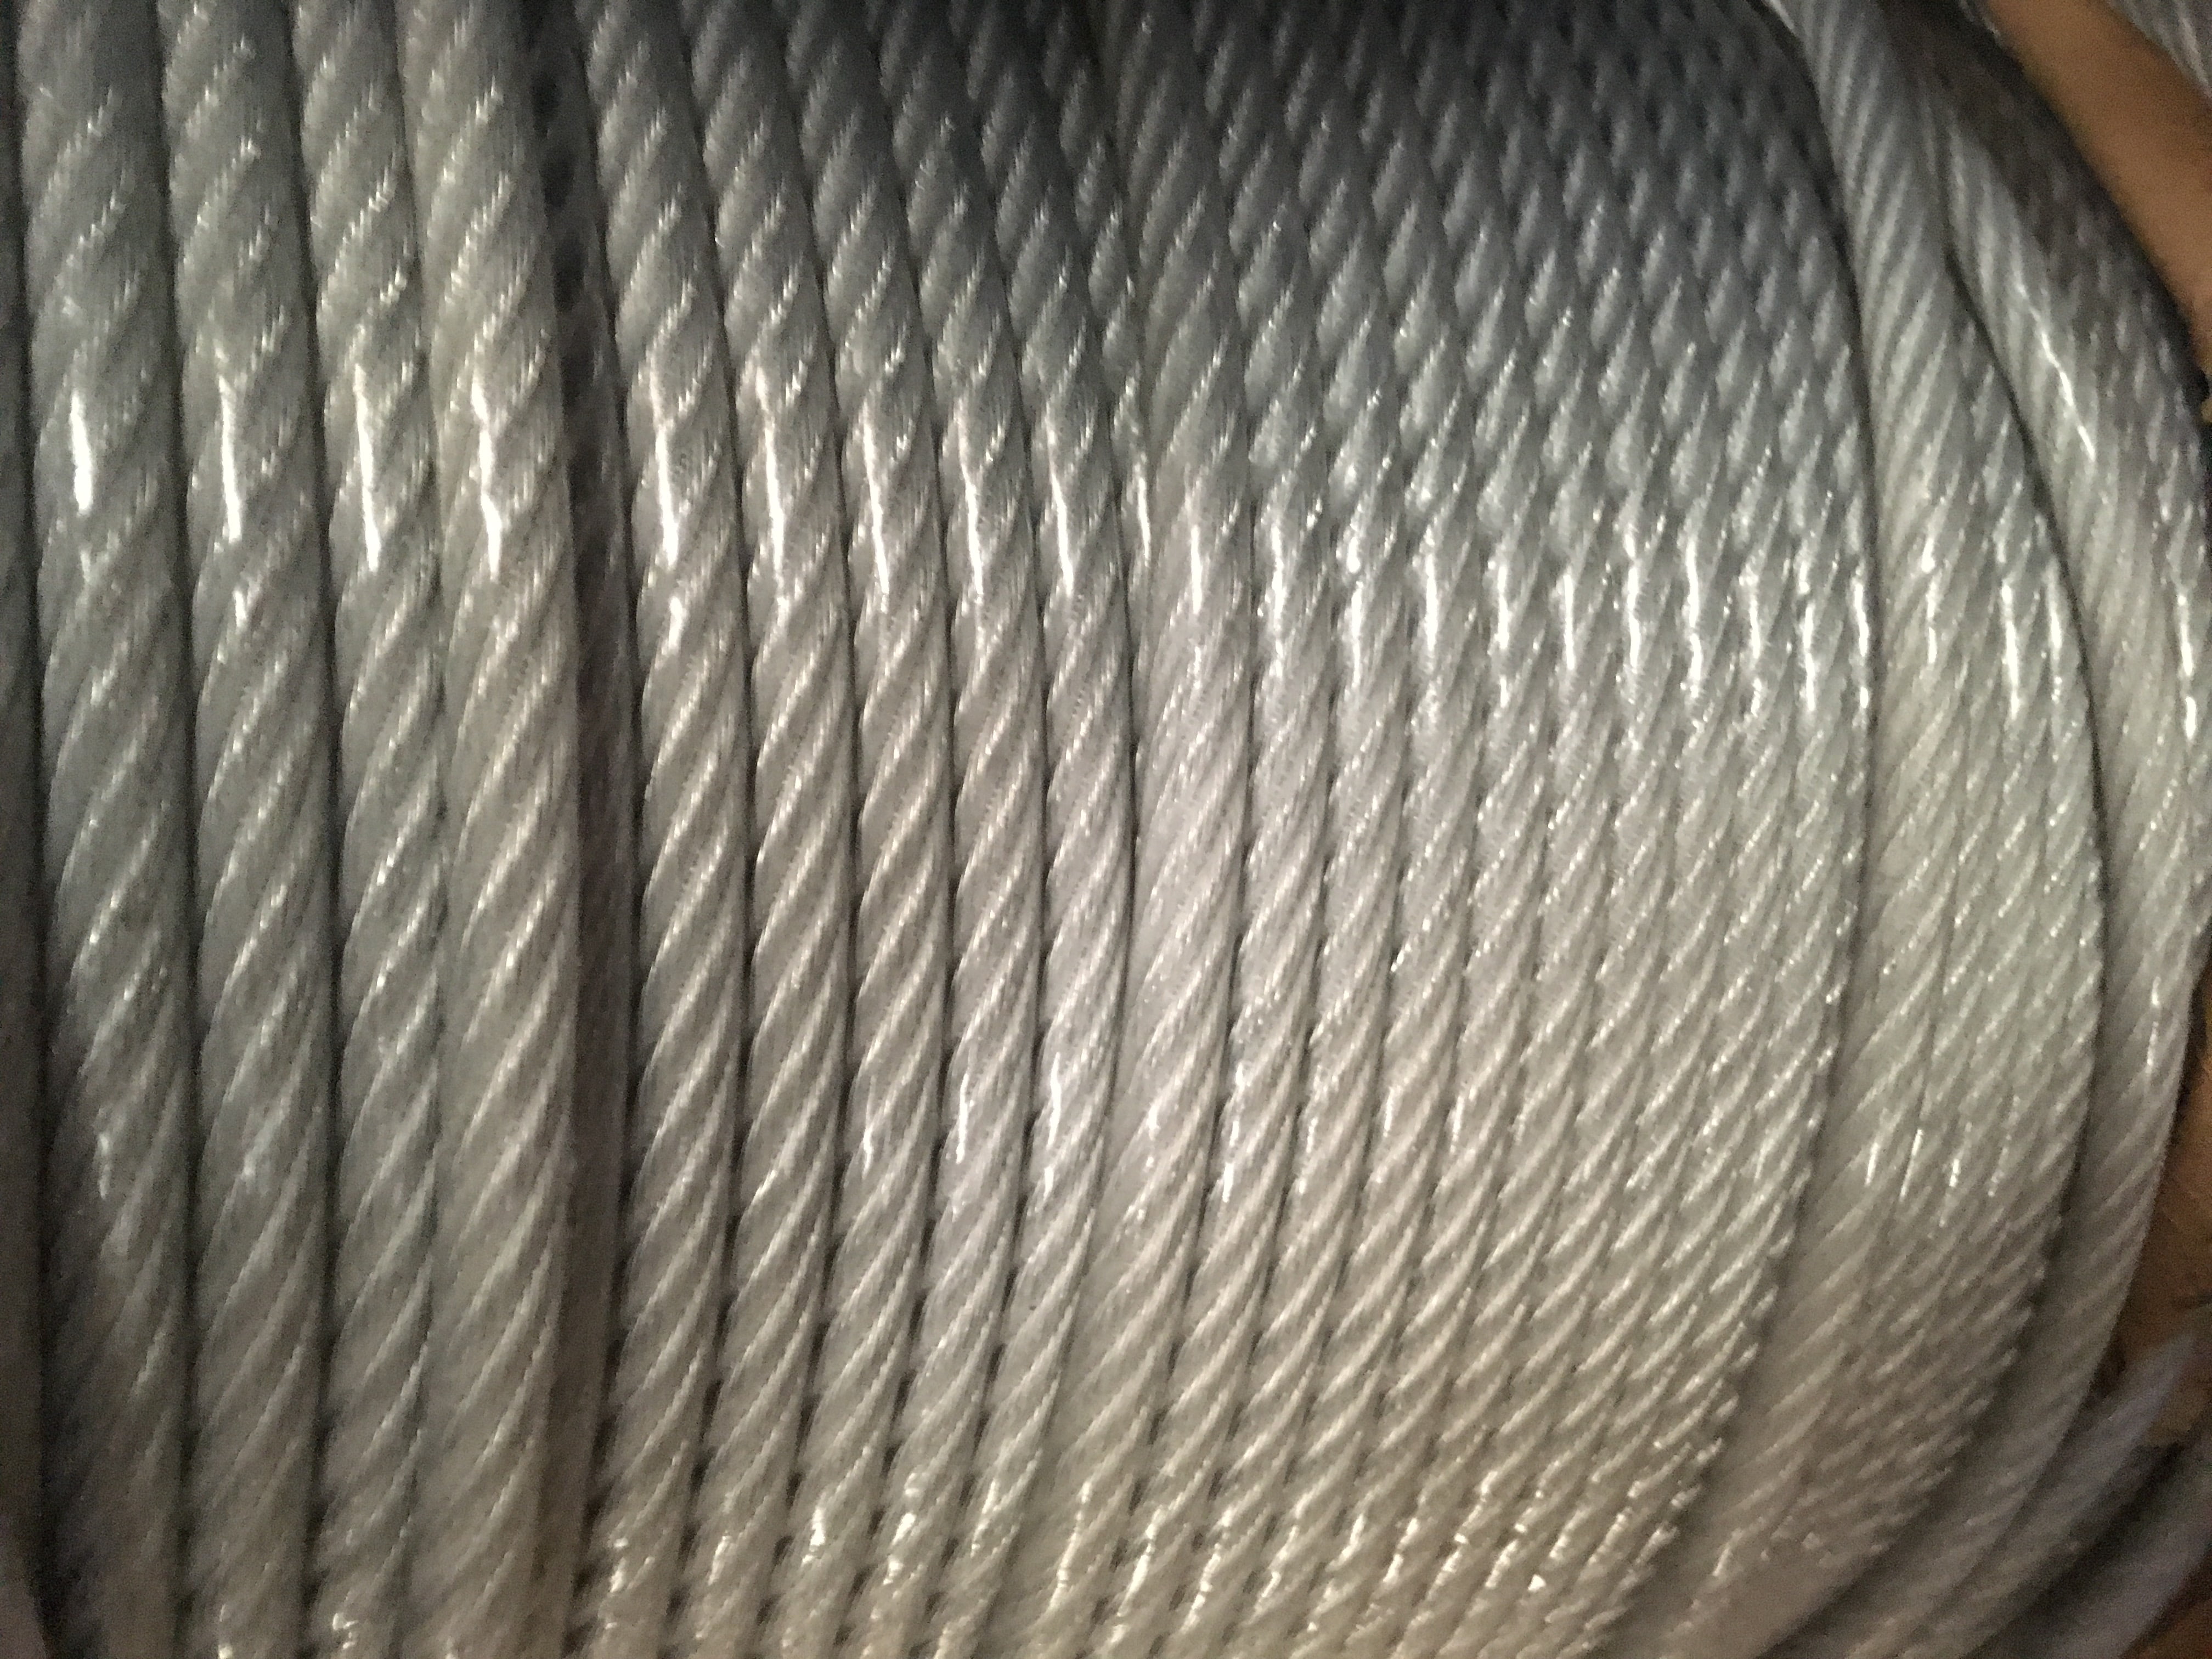 500 & 1,000 ft 100 250 Vinyl Coated Wire Rope Aircraft Cable 500 ft Reel 1/8-Inch Thru 3/16-Inch 7x7 : 50 